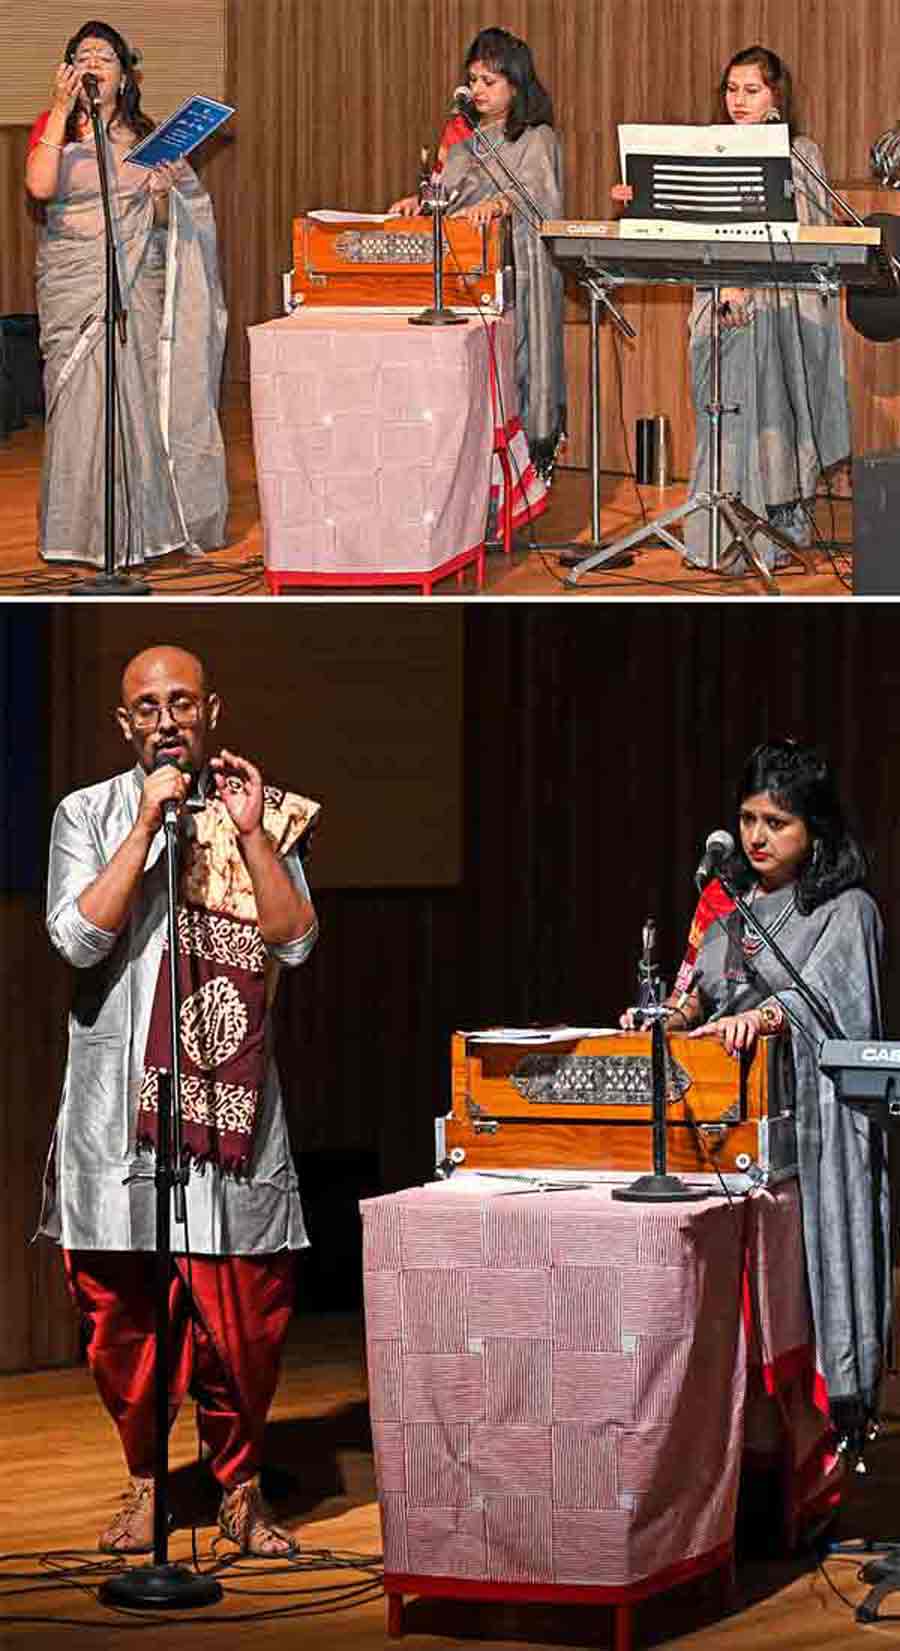 The evening witnessed some spell-binding rendition of Rabindrasangeet and ghazals. Sonali Ghosh, a trained singer and mother to Ditipriya Ghosh of Class VI, presented ‘Dil e naadan tujhe hua kya hai’, a ghazal originally written and composed by Mirza Ghalib. Ghosh said: “My daughter joined Indus Valley World School last year, and since then the school has given me a new life too. I am grateful for the school for providing this platform to parents like me. It was truly an enriching programme today and I am glad I was a part of it”